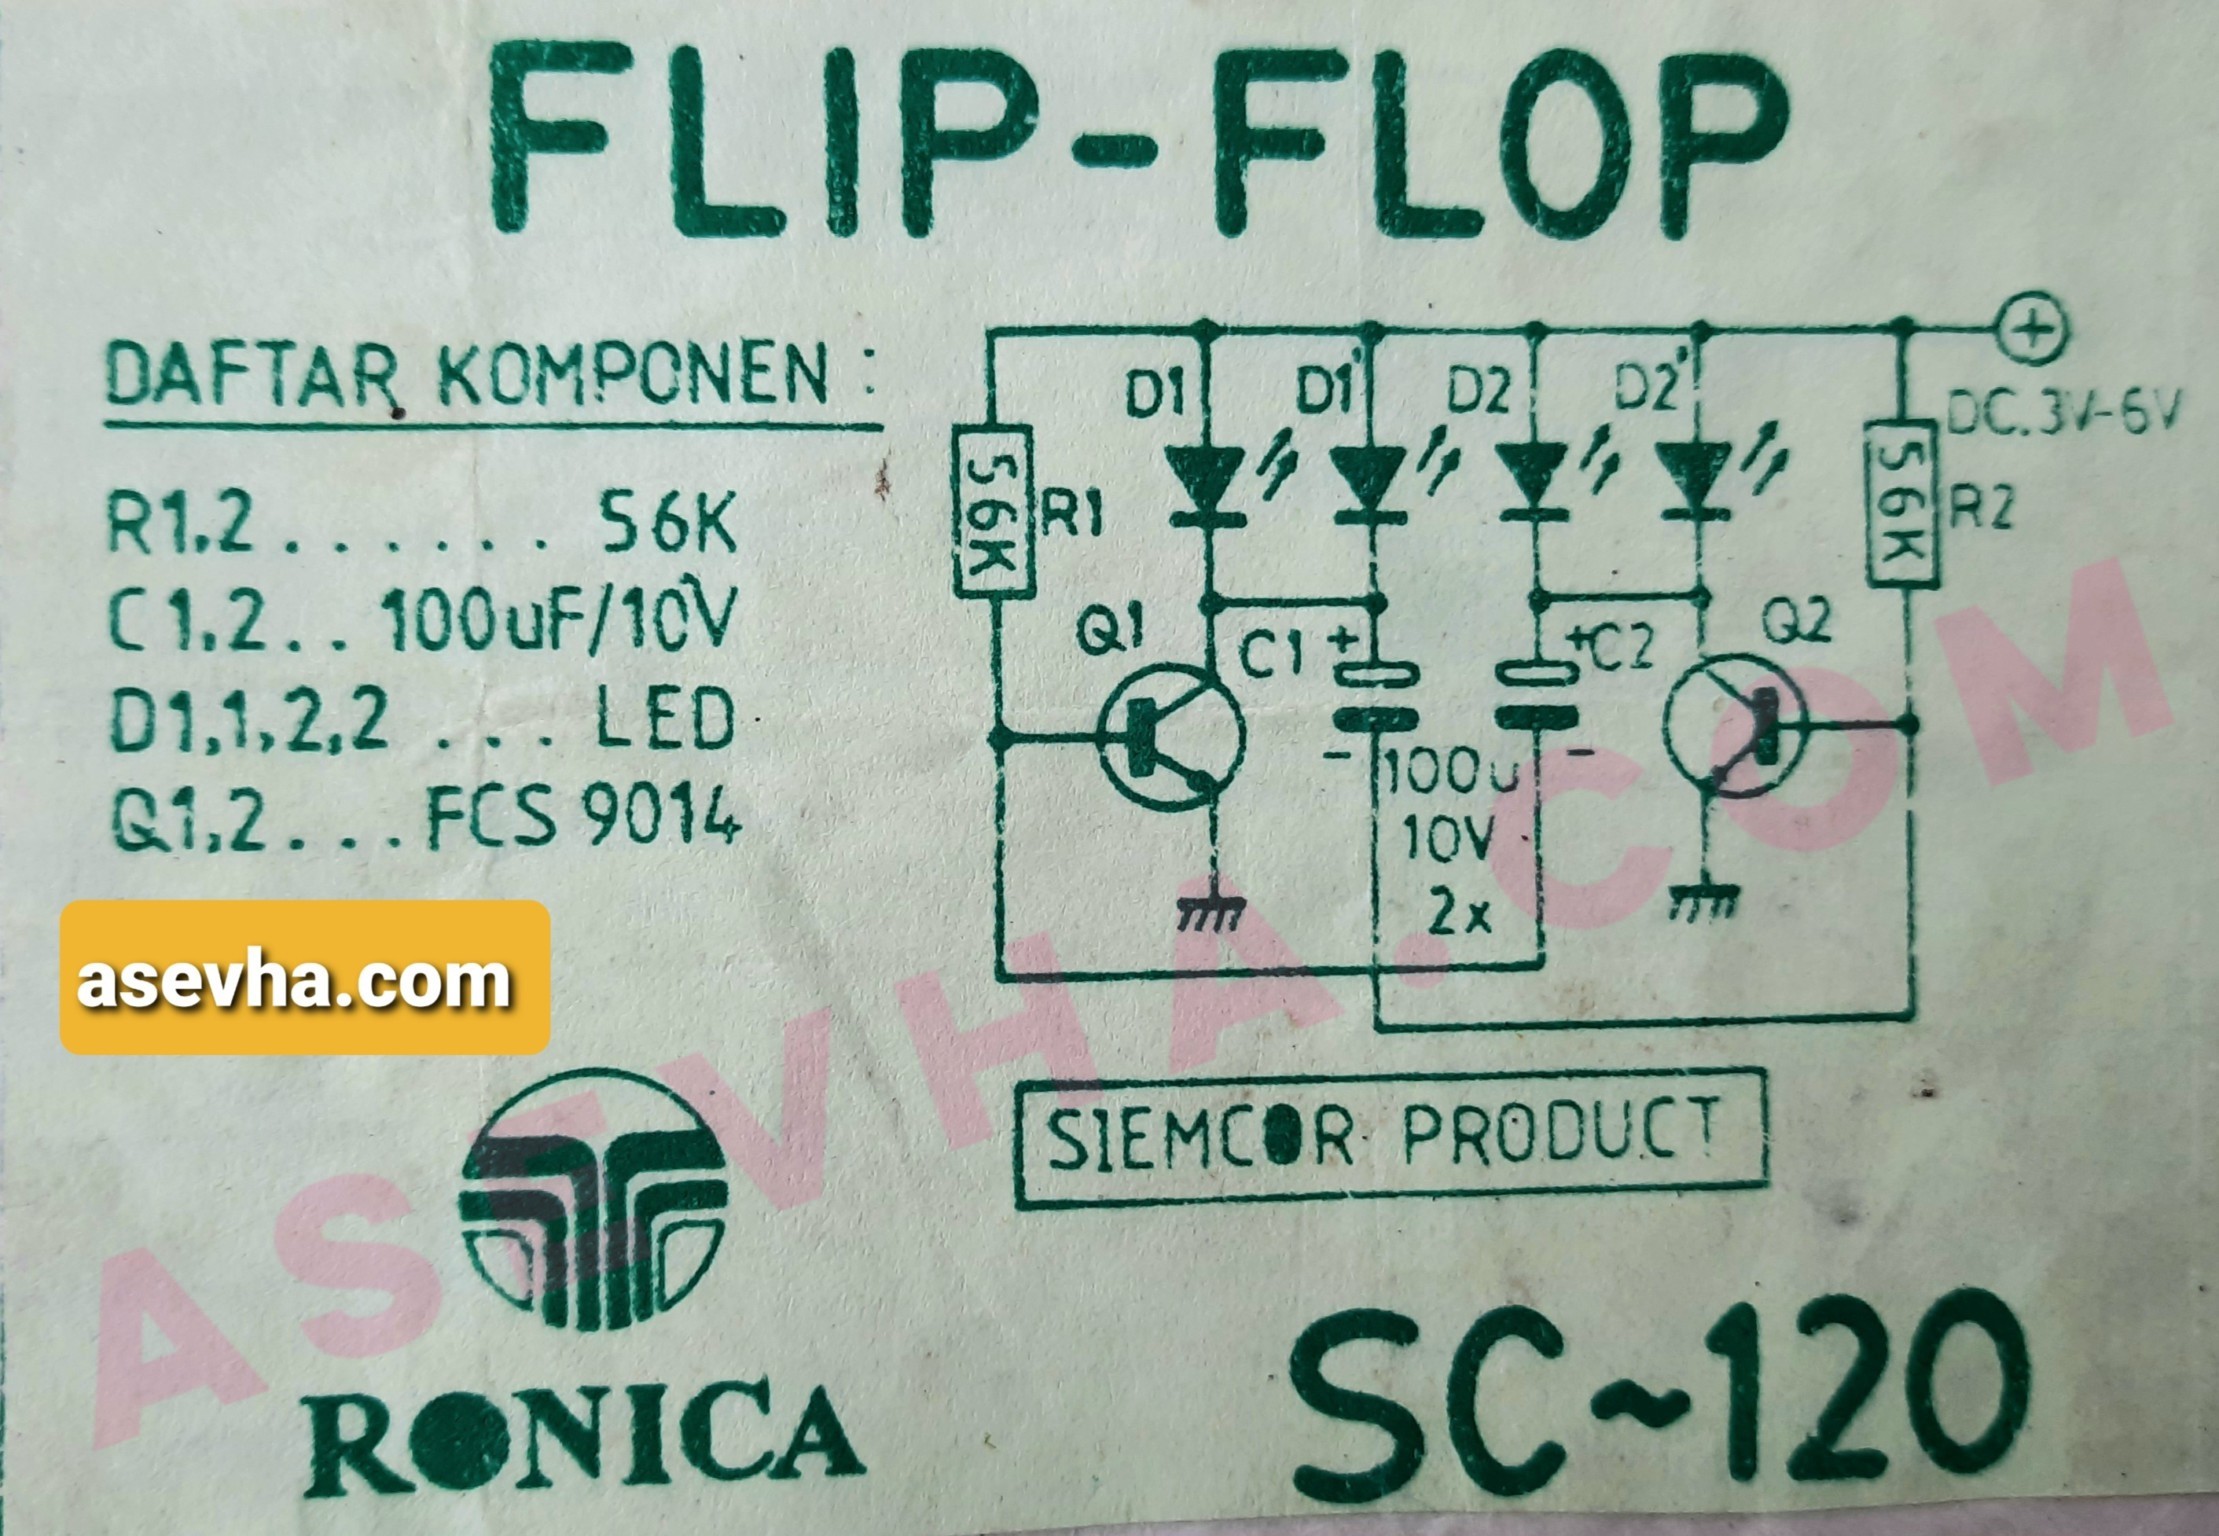 Skema Lampu Flip-flop by Ronica SC-120